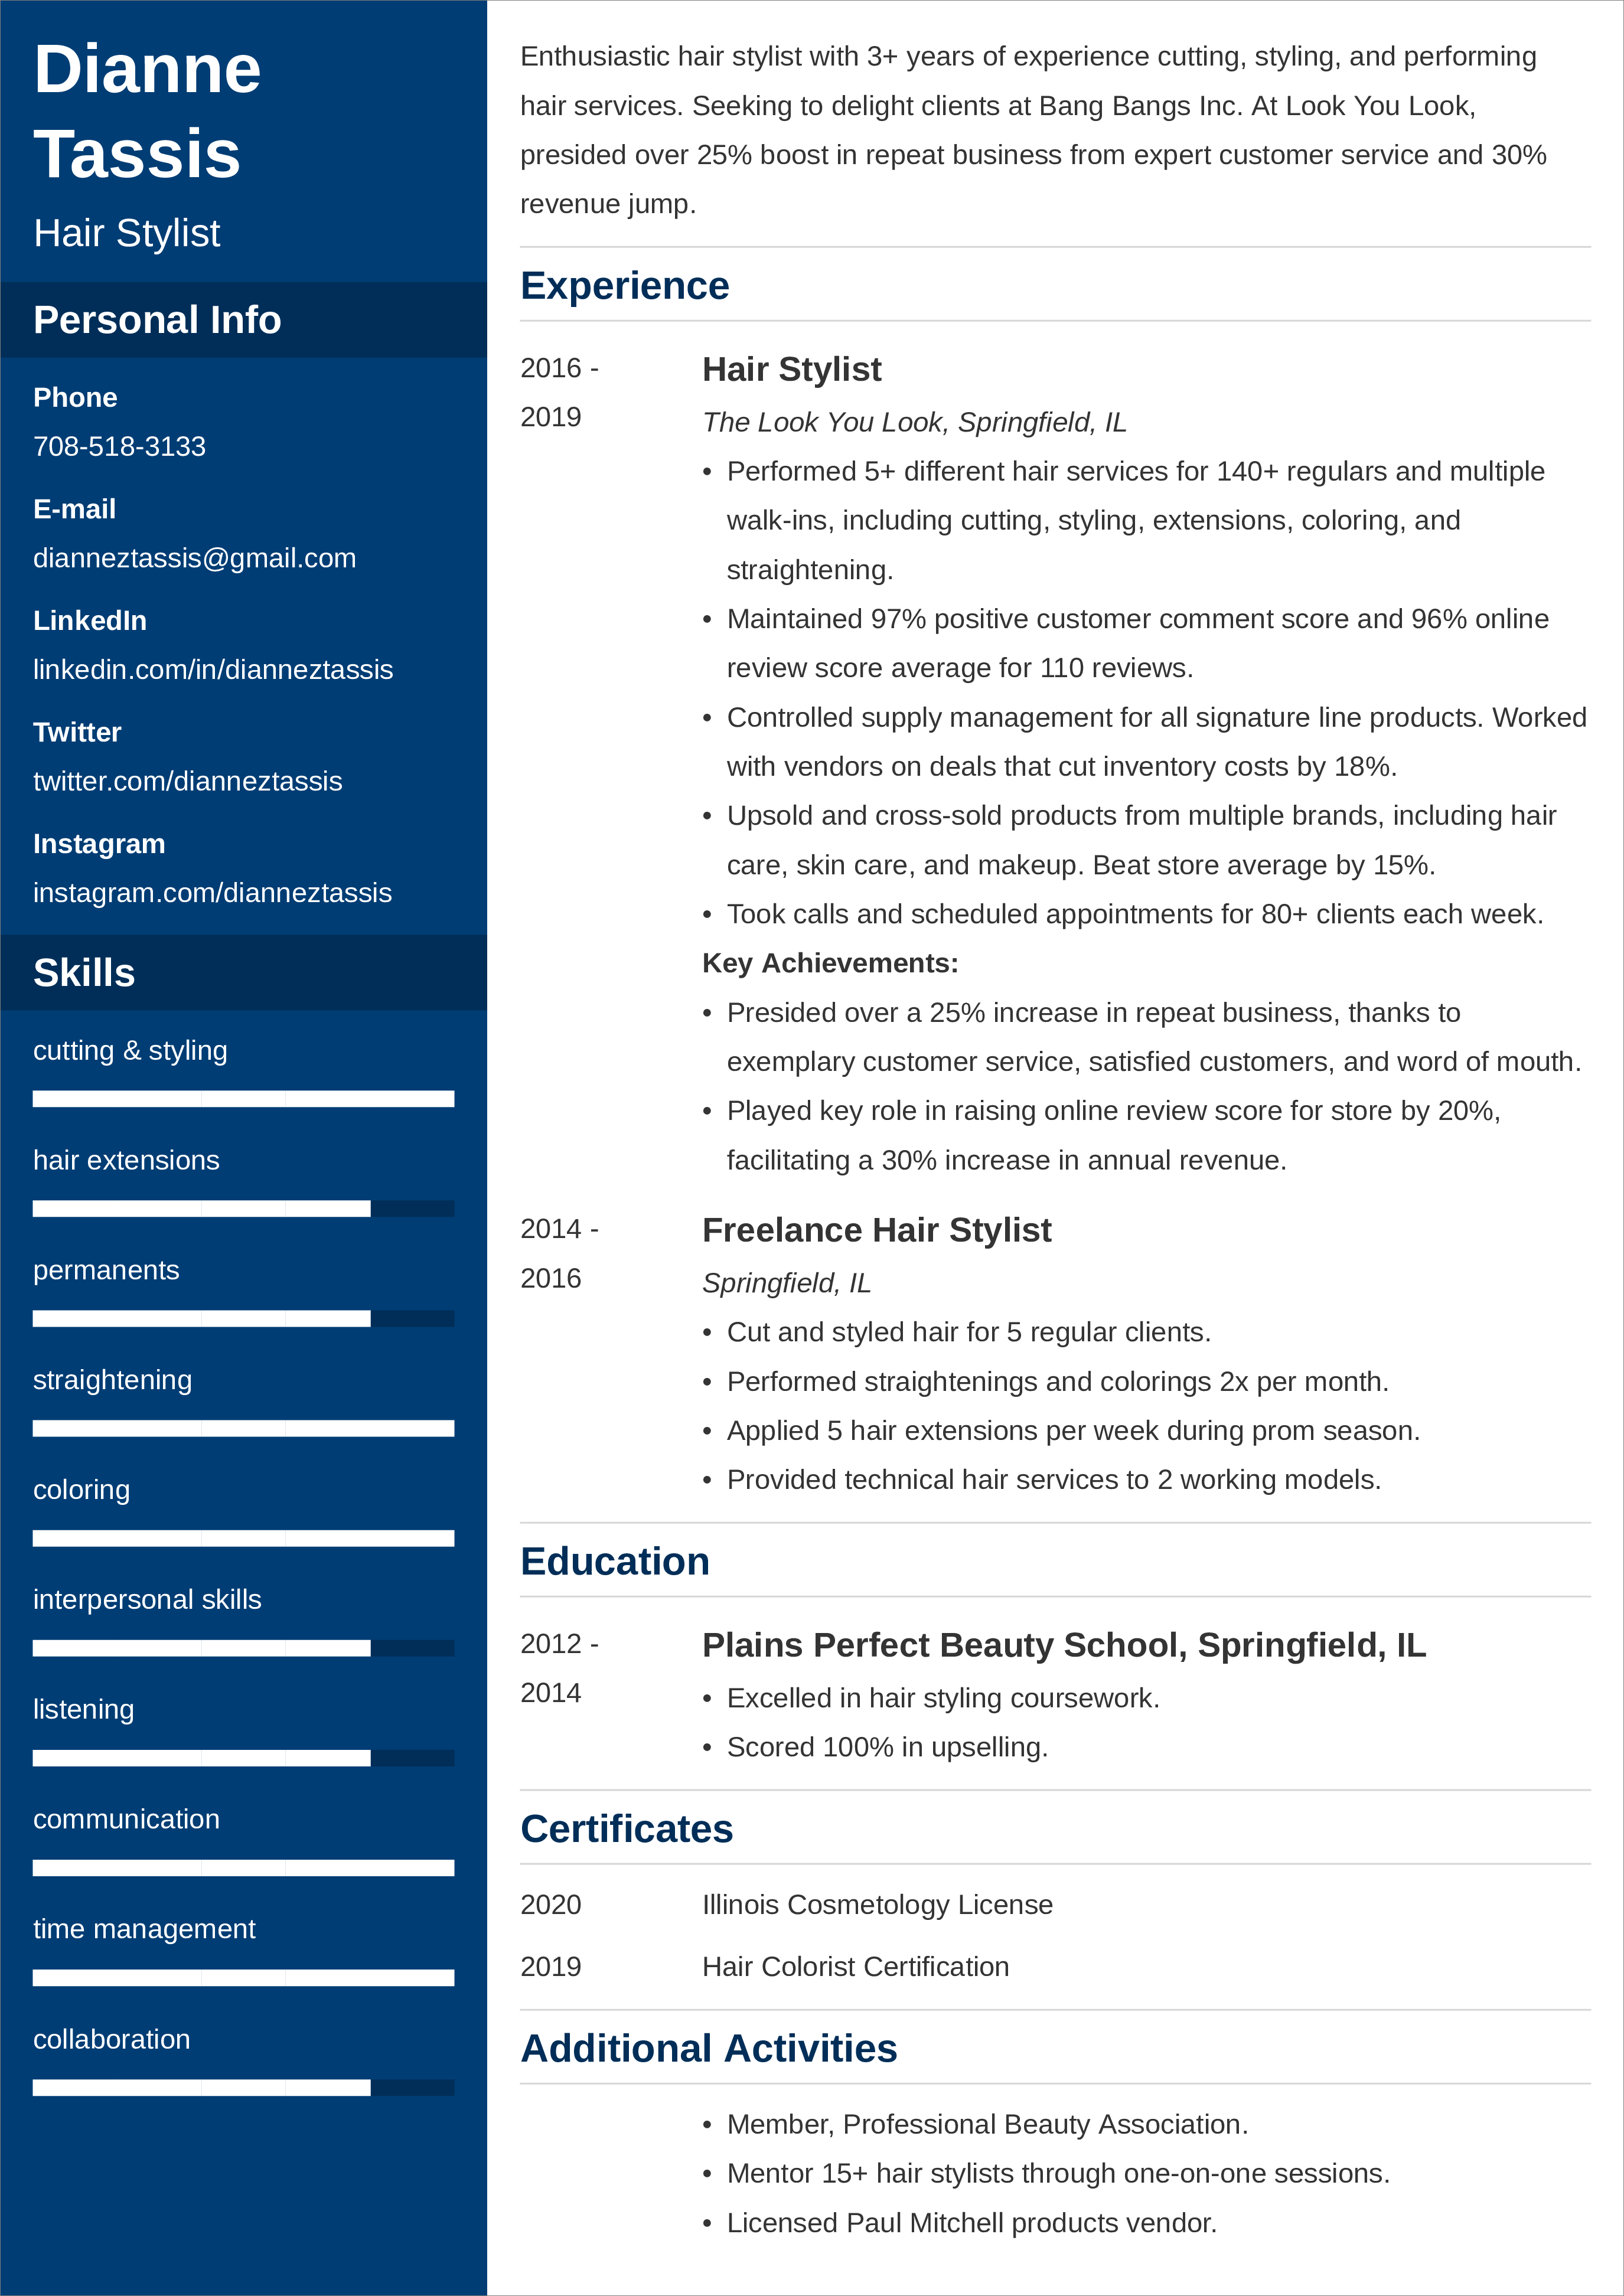 Hair Stylist Resume Example with Skills (+ Writing Tips)